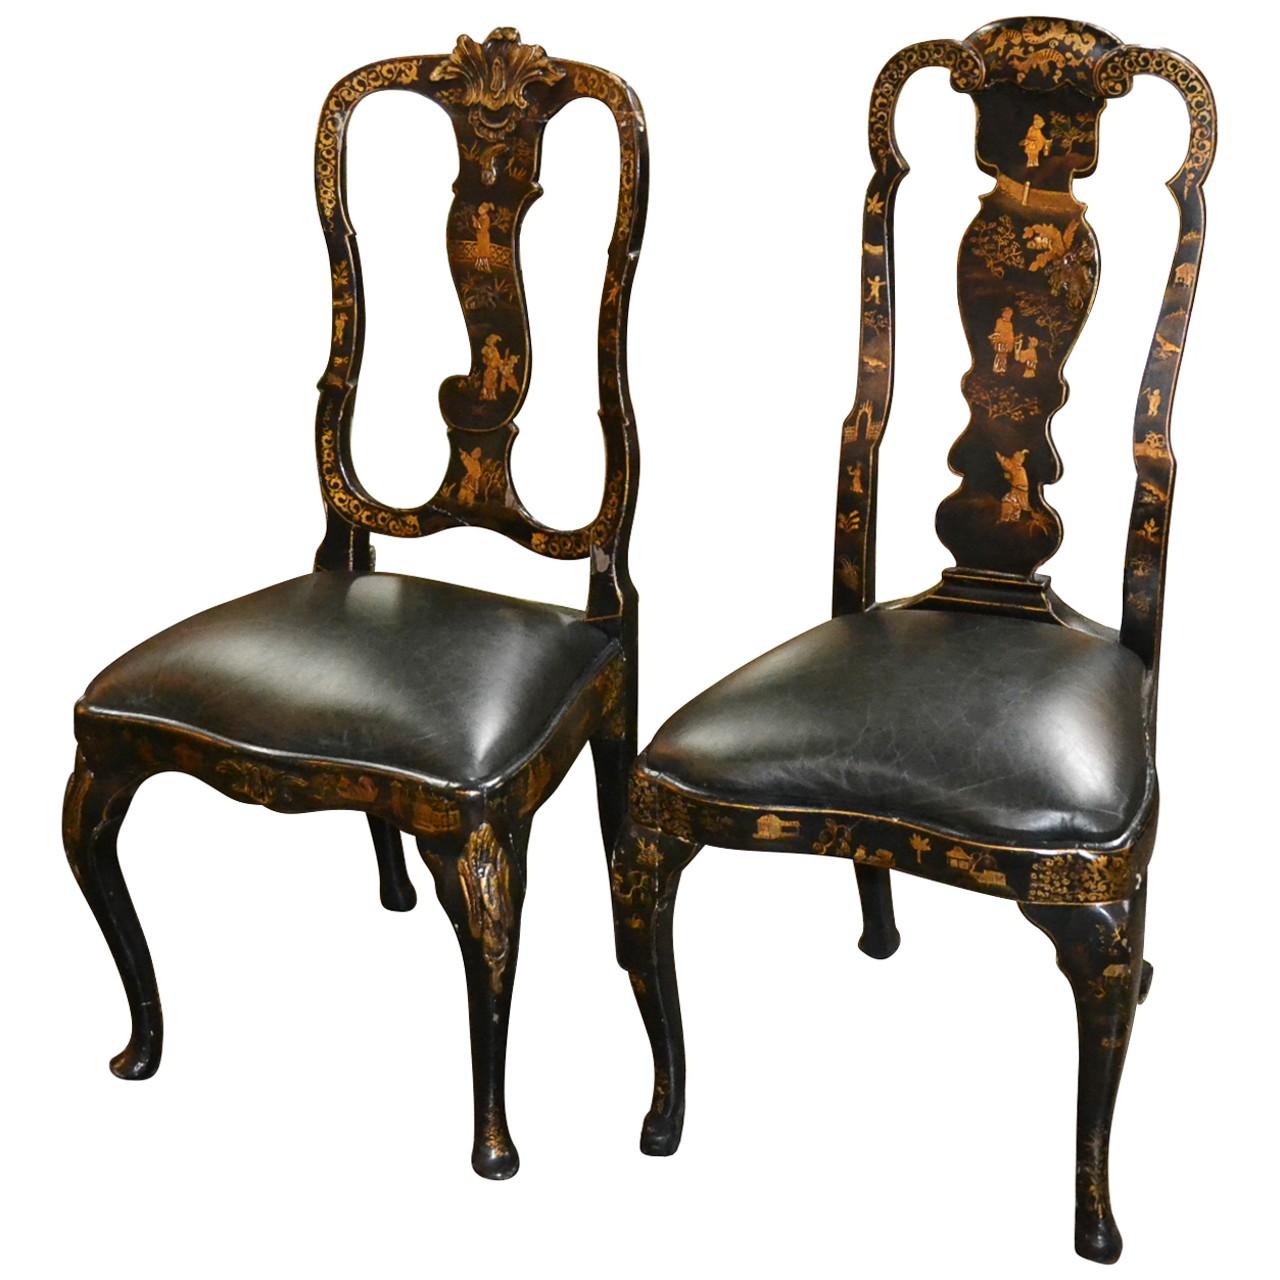 Companion Pair of 19th Century Black Chinoiserie English Side Chairs